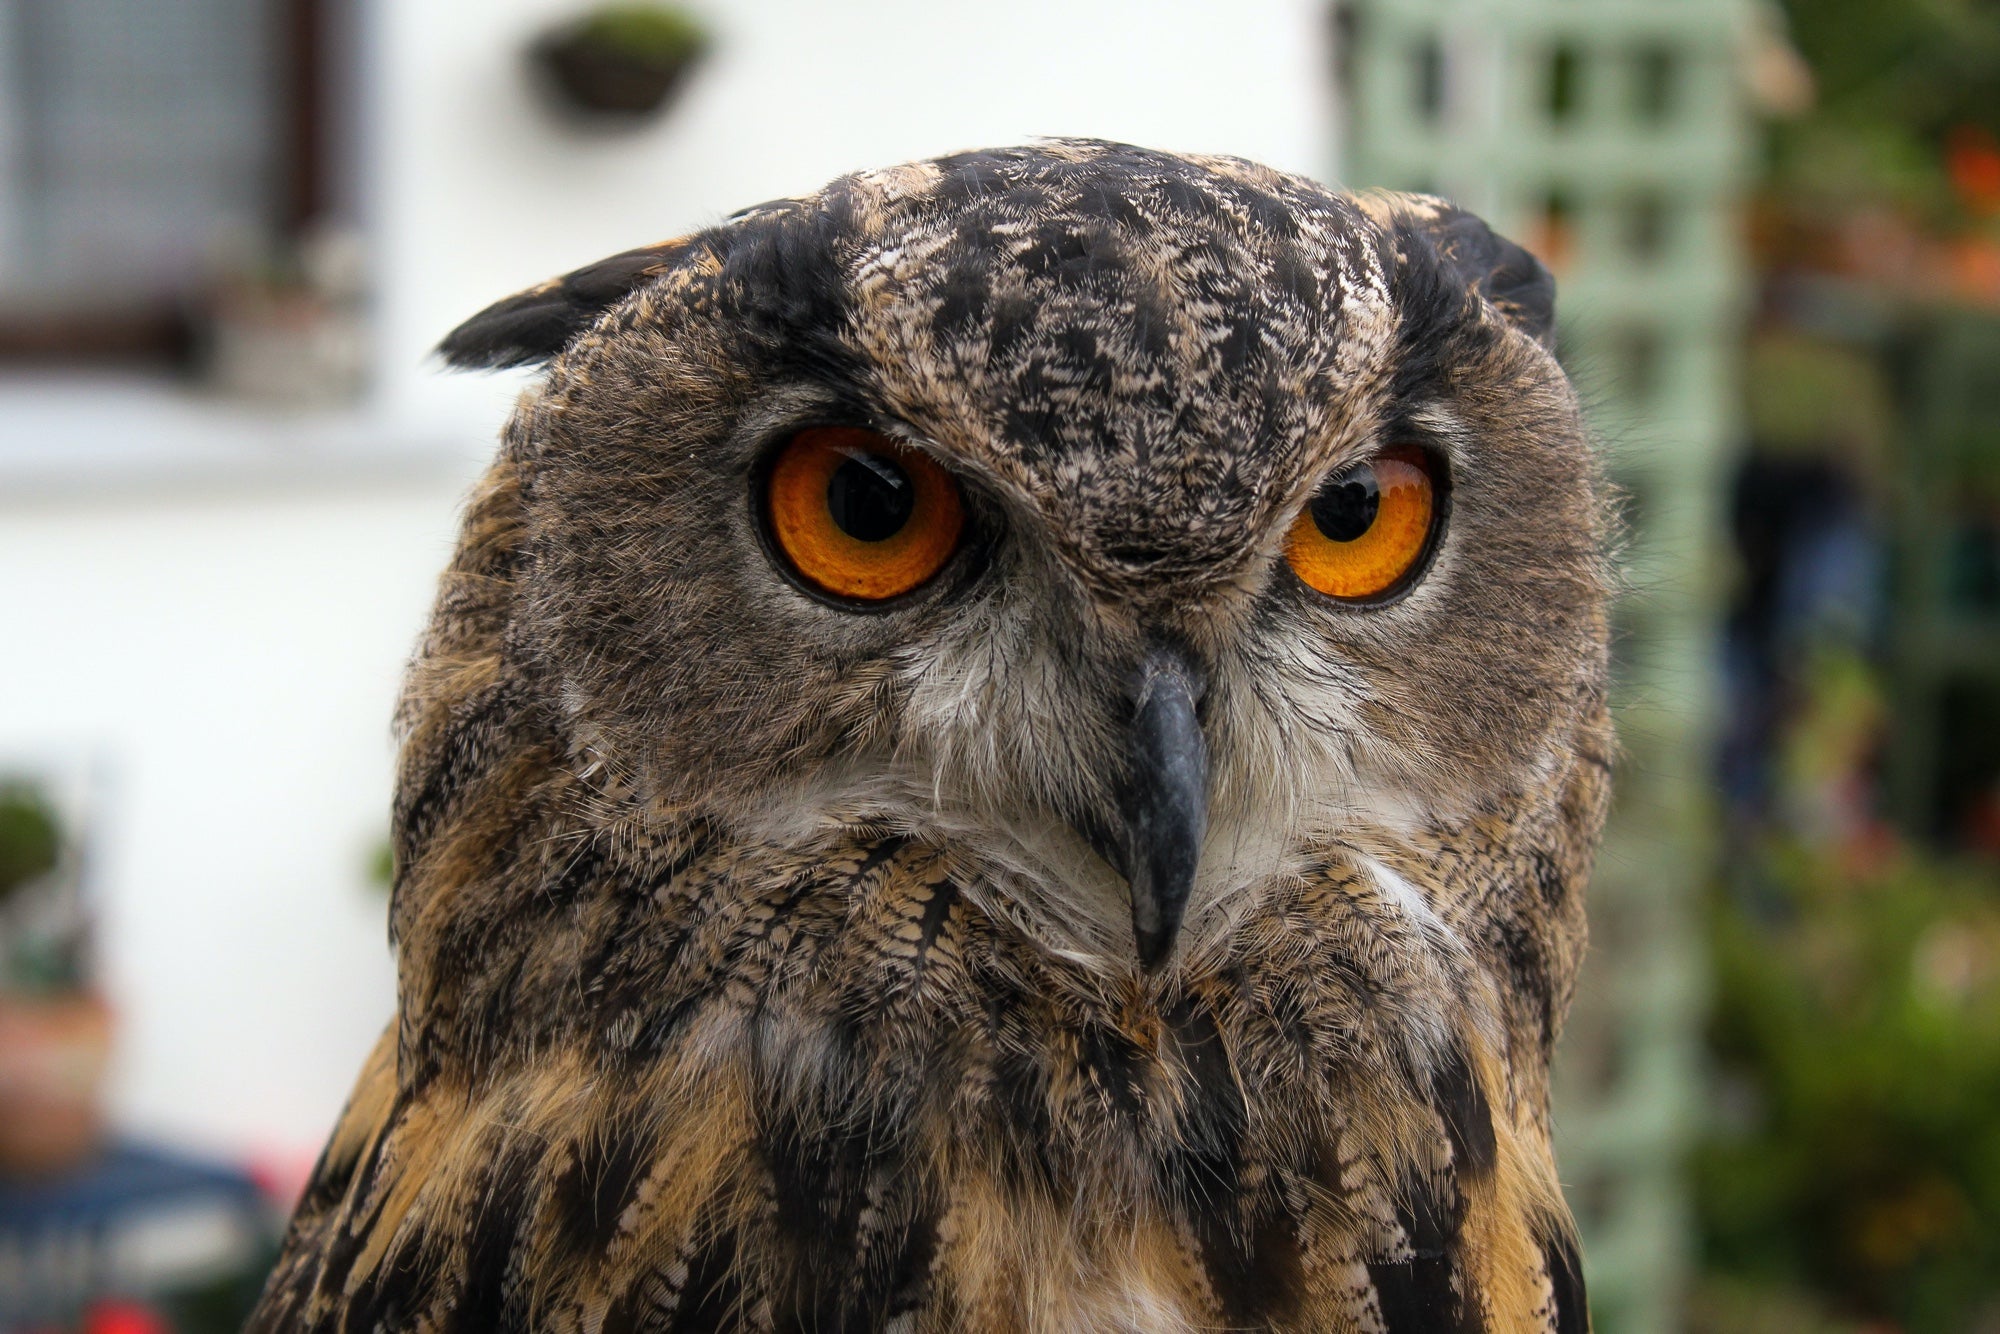 Close-up of an owl with brown feathers and red eyes